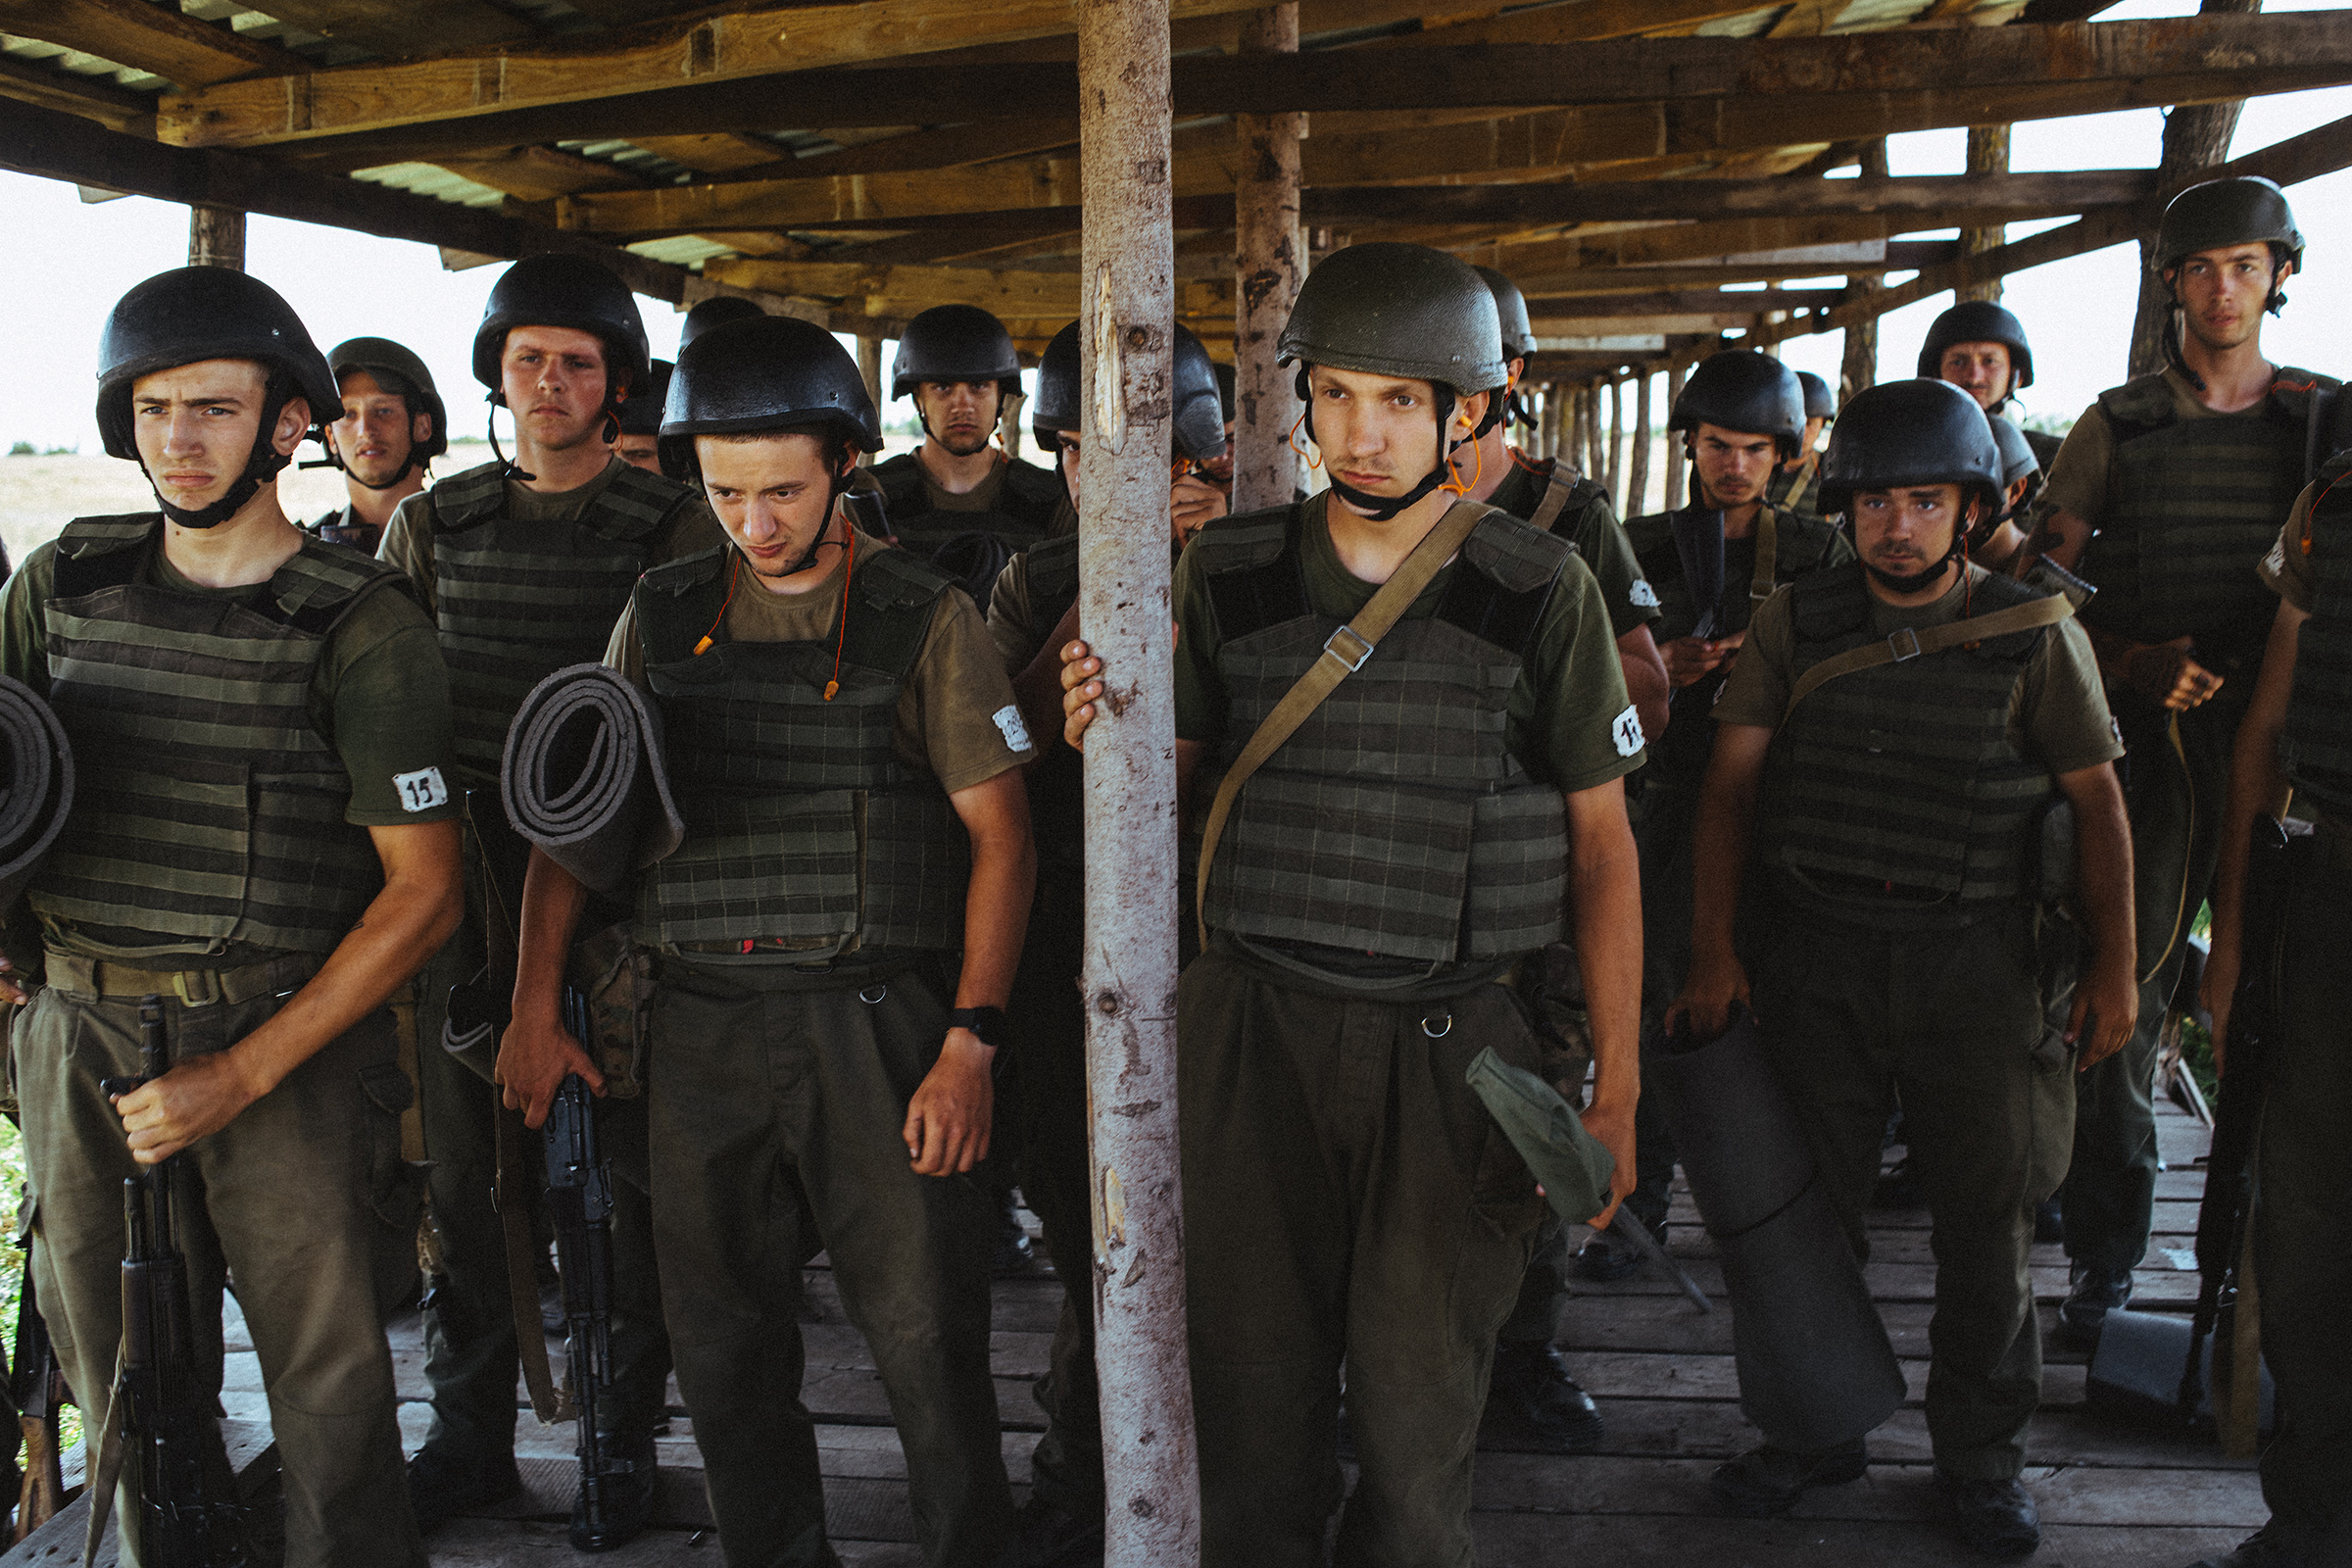 New recruits take part in basic training at one of Azov's bases near the frontline city of Mariupol in eastern Ukraine in August 2019.